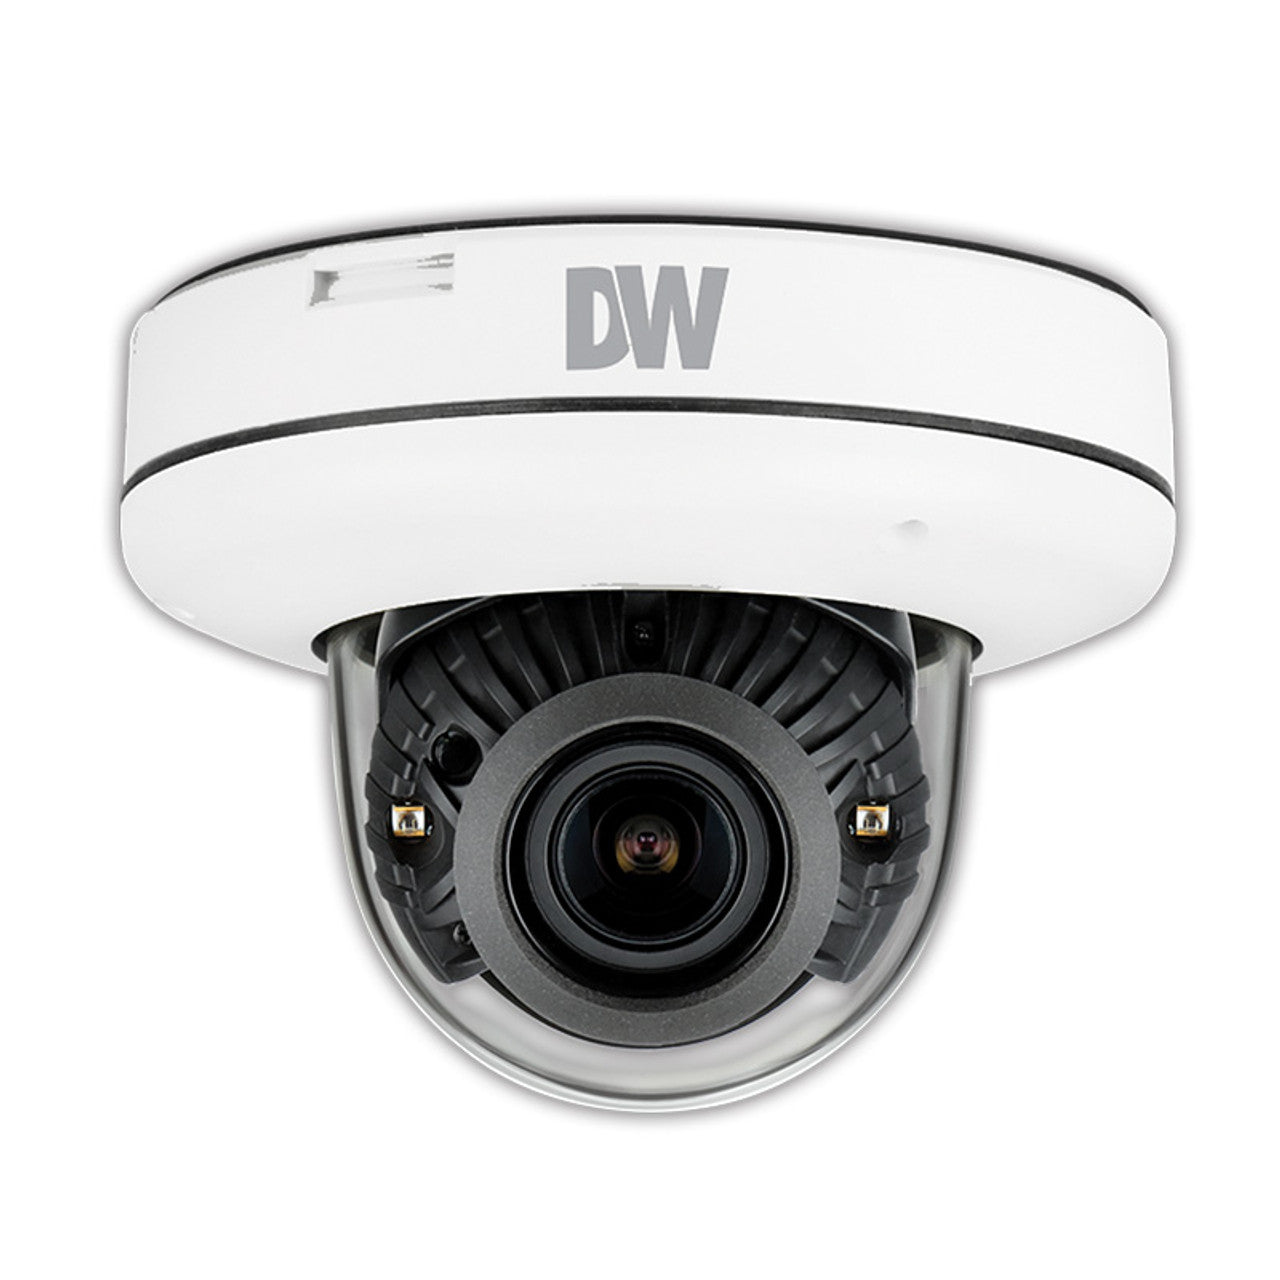 Digital Watchdog DWC-MV85WIATW 5MP Night Vision Outdoor Dome IP Security Camera with Motorized Lens